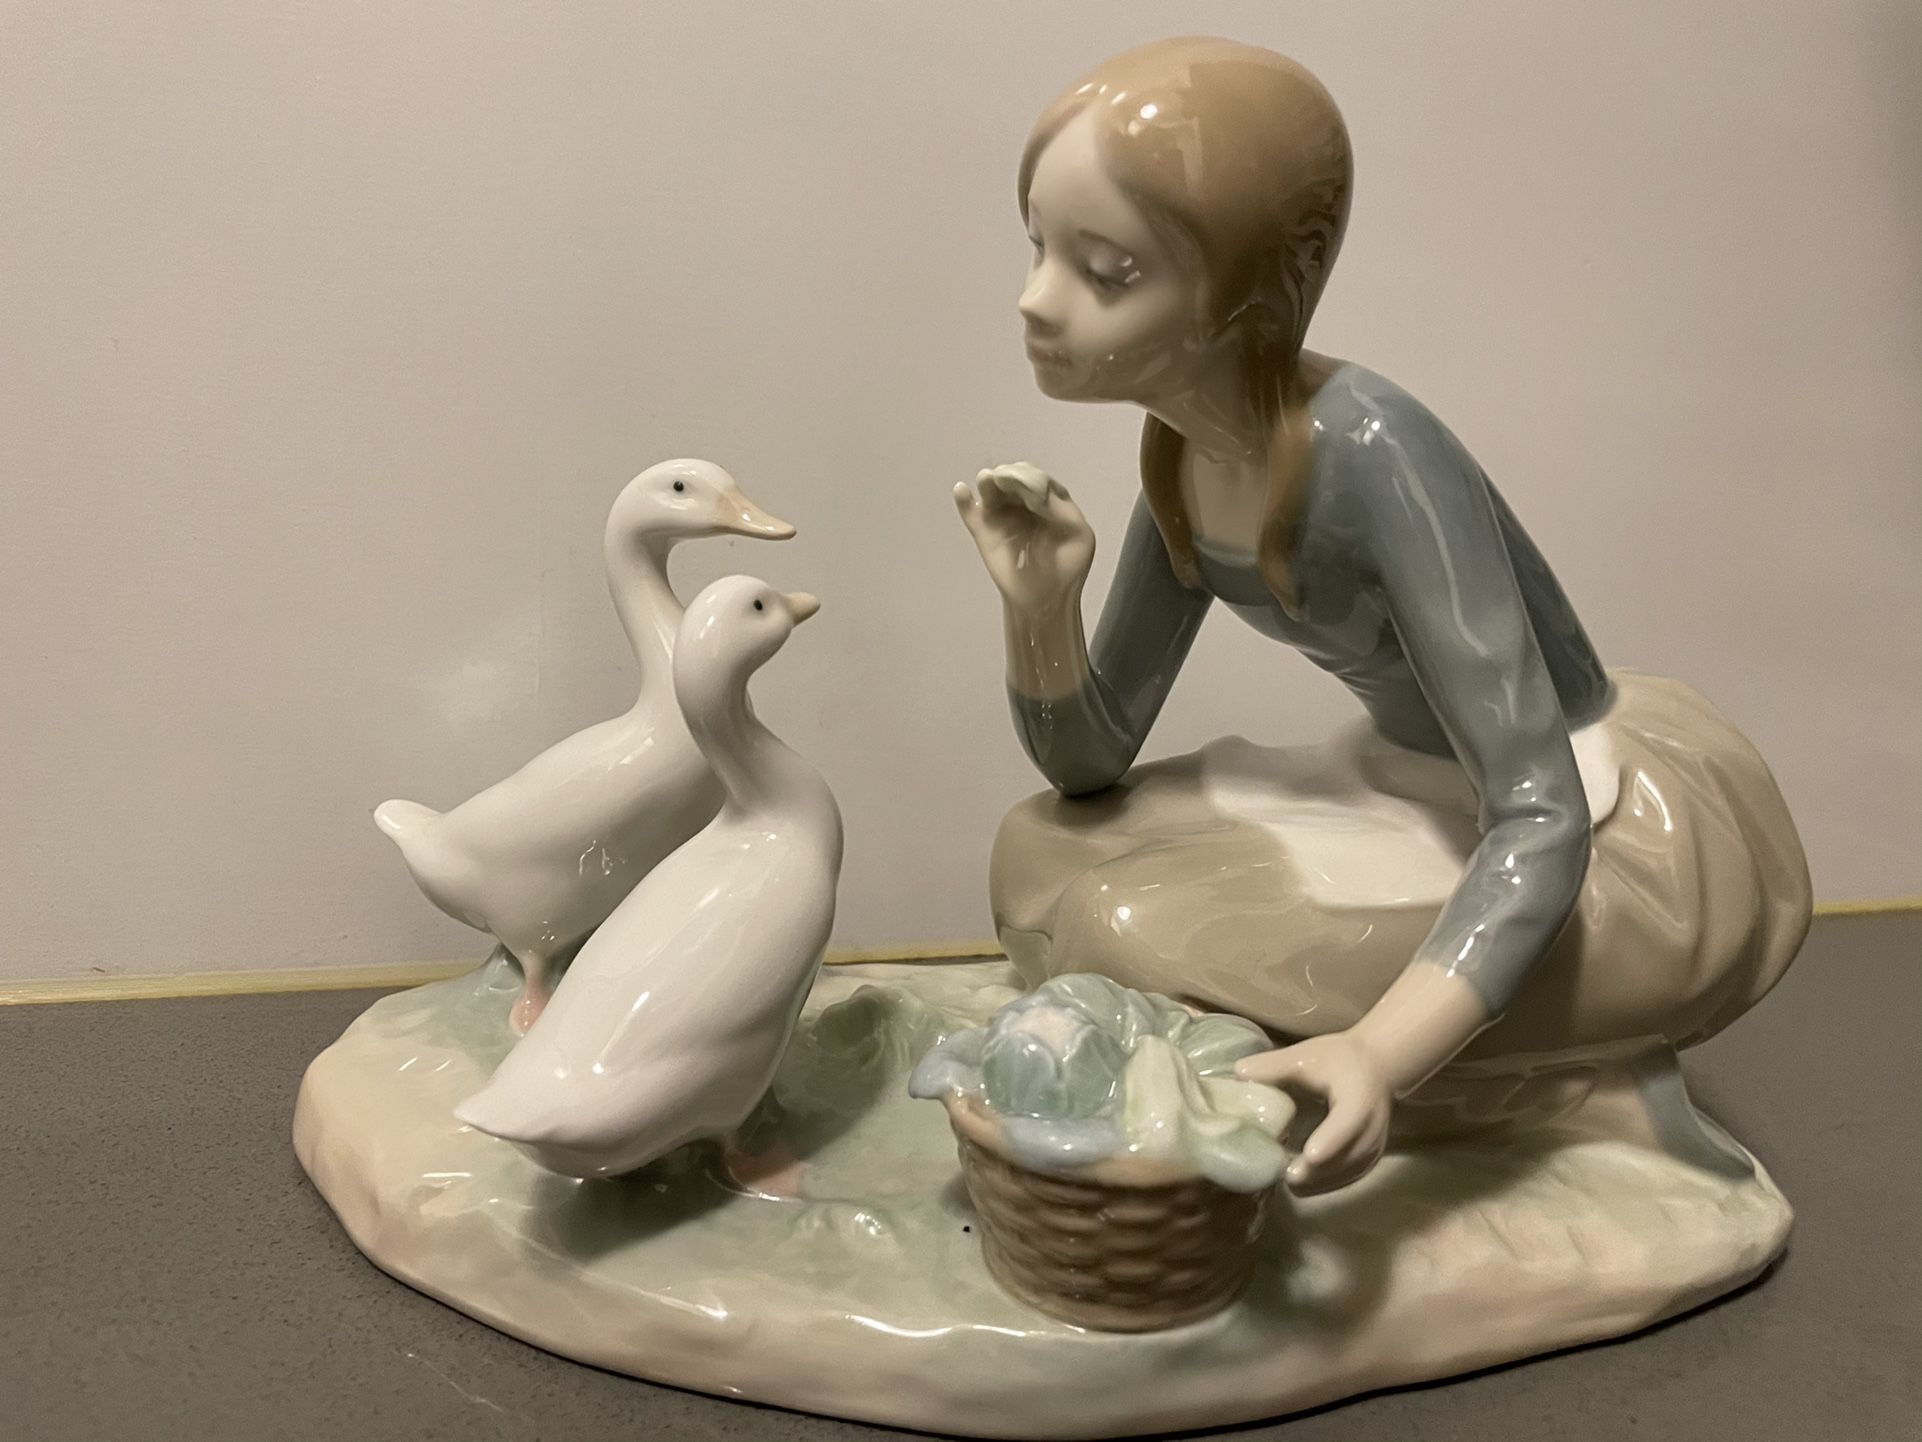 Lladro “Food For Ducks” Figurine Without Original Box 